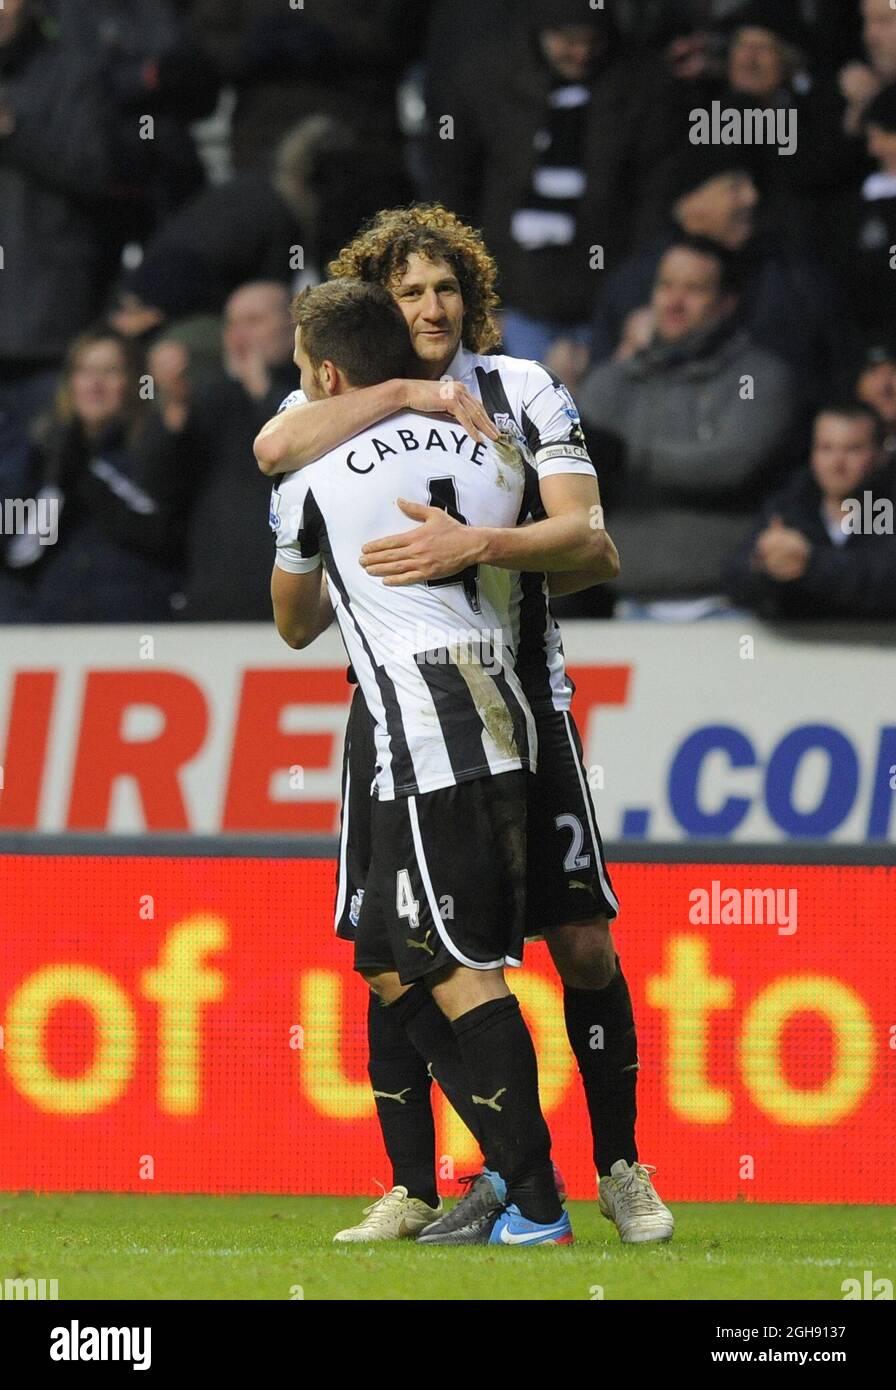 Fabricio Coloccini of Newcastle United (R) celebrates after the final whistle with Yohan Cabaye of Newcastle United during the Barclays Premier League soccer match between Newcastle Utd and Chelsea at St. James' Park in Newcastle, United Kingdom on February 02, 2013. Stock Photo